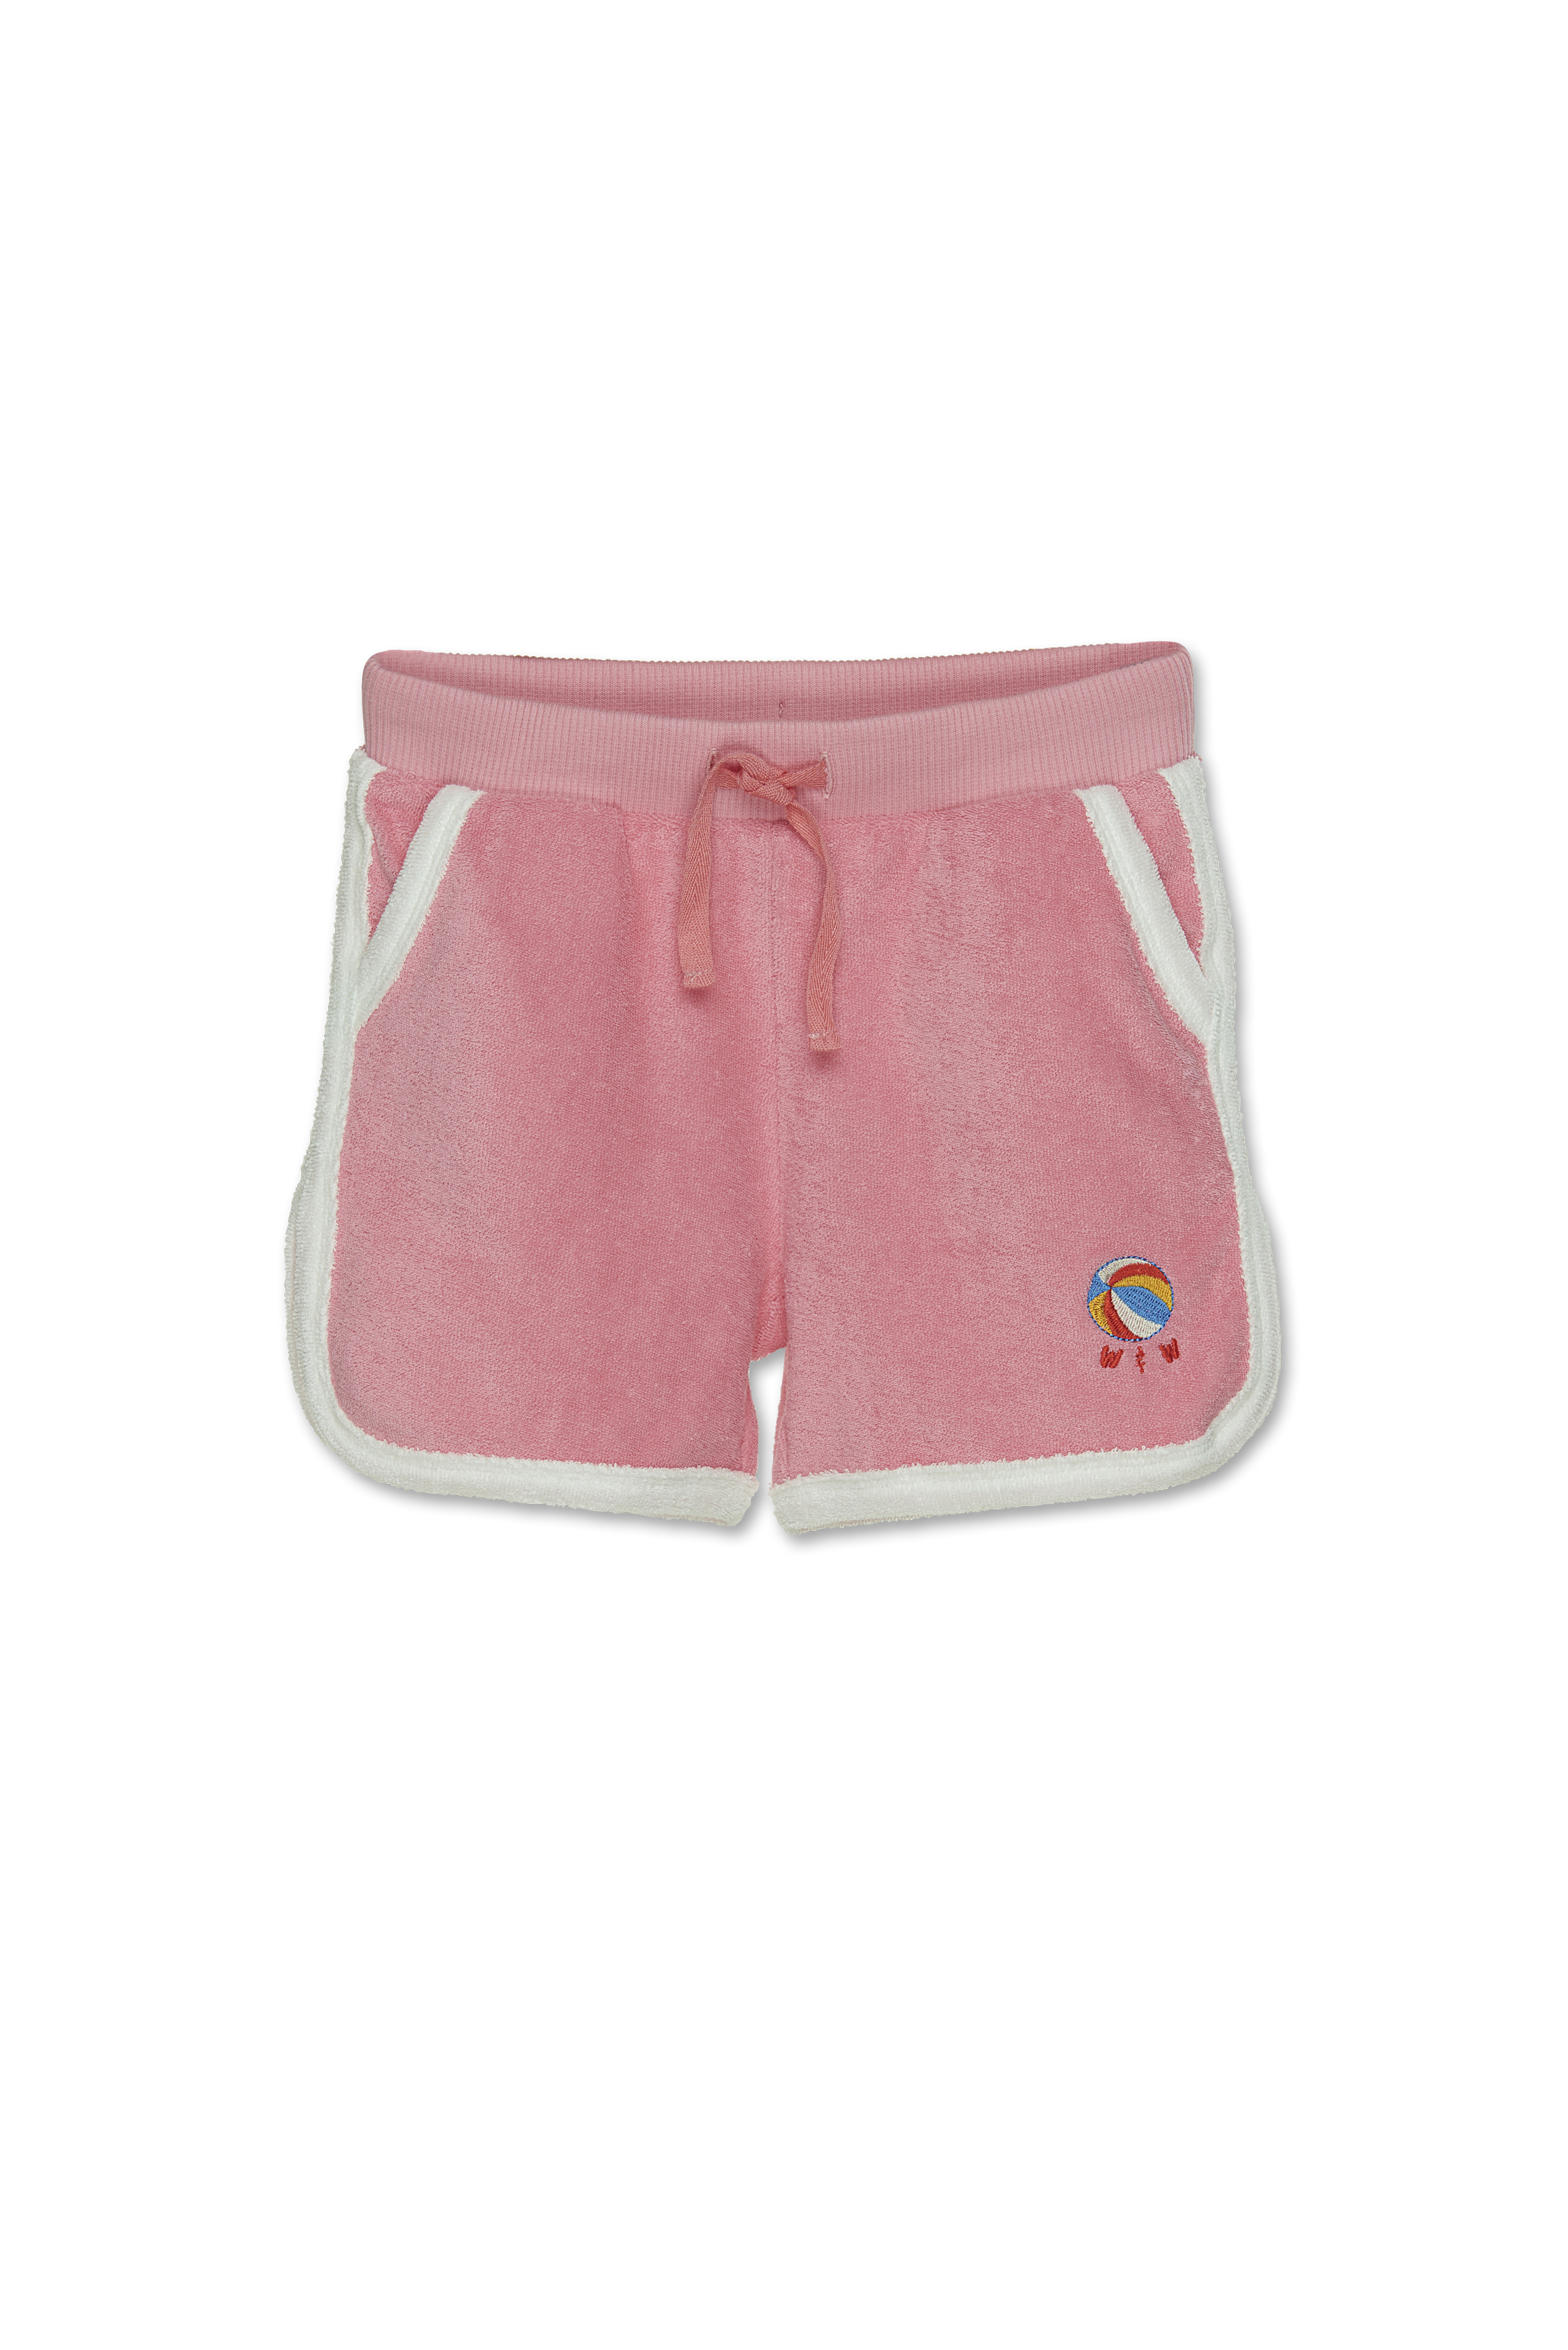 Wander and Wonder - terry gym shorts - bubble gum